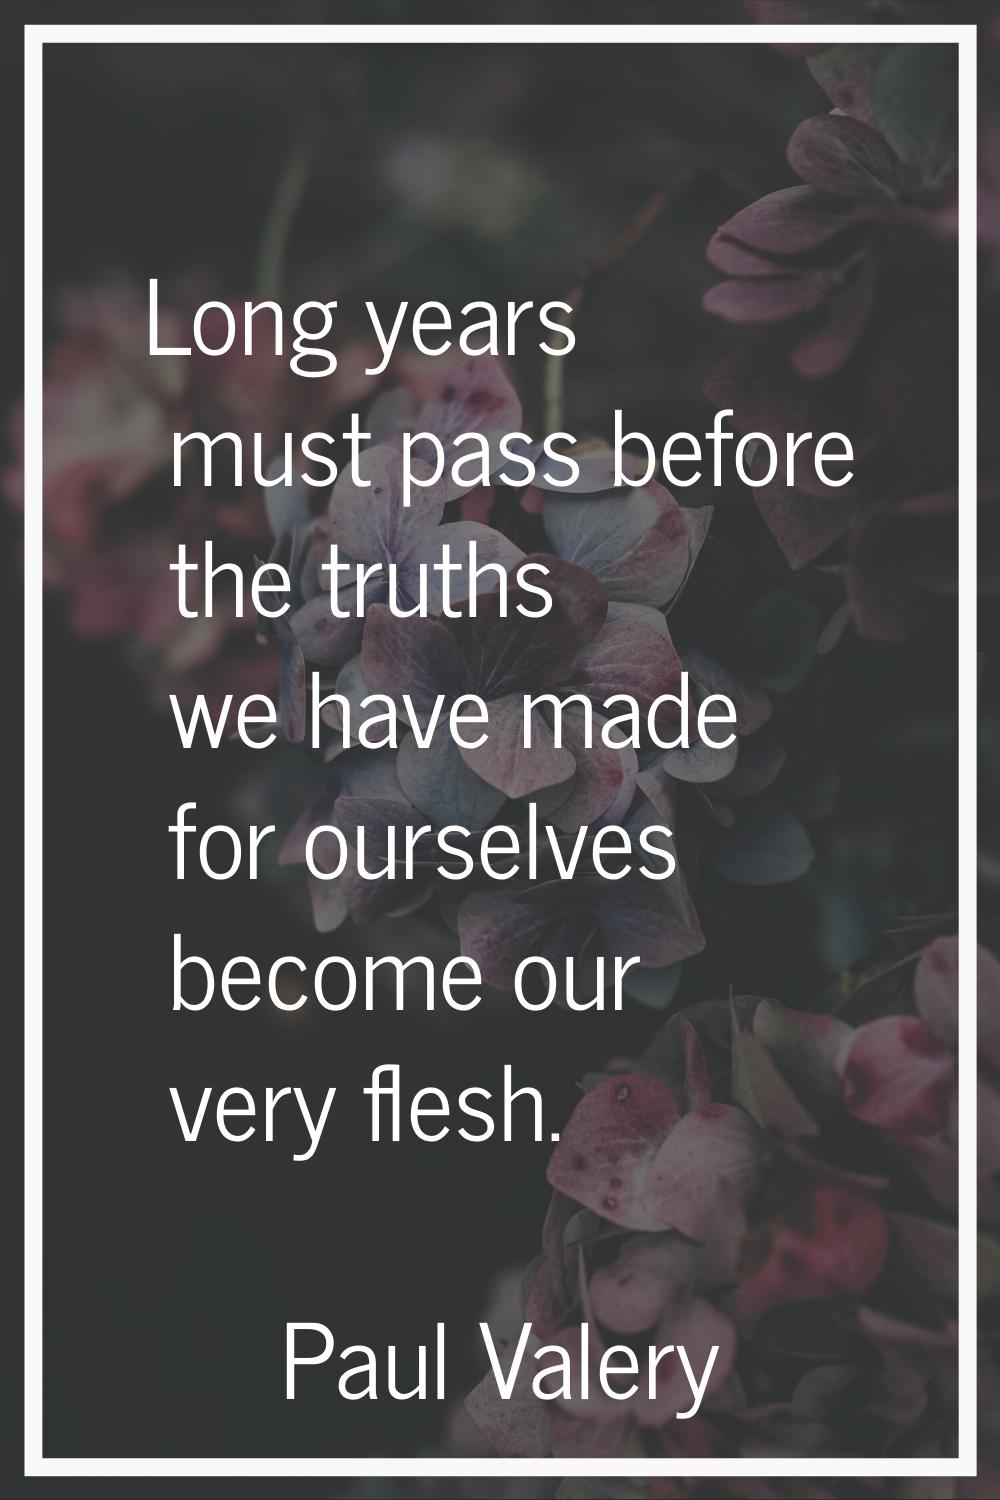 Long years must pass before the truths we have made for ourselves become our very flesh.